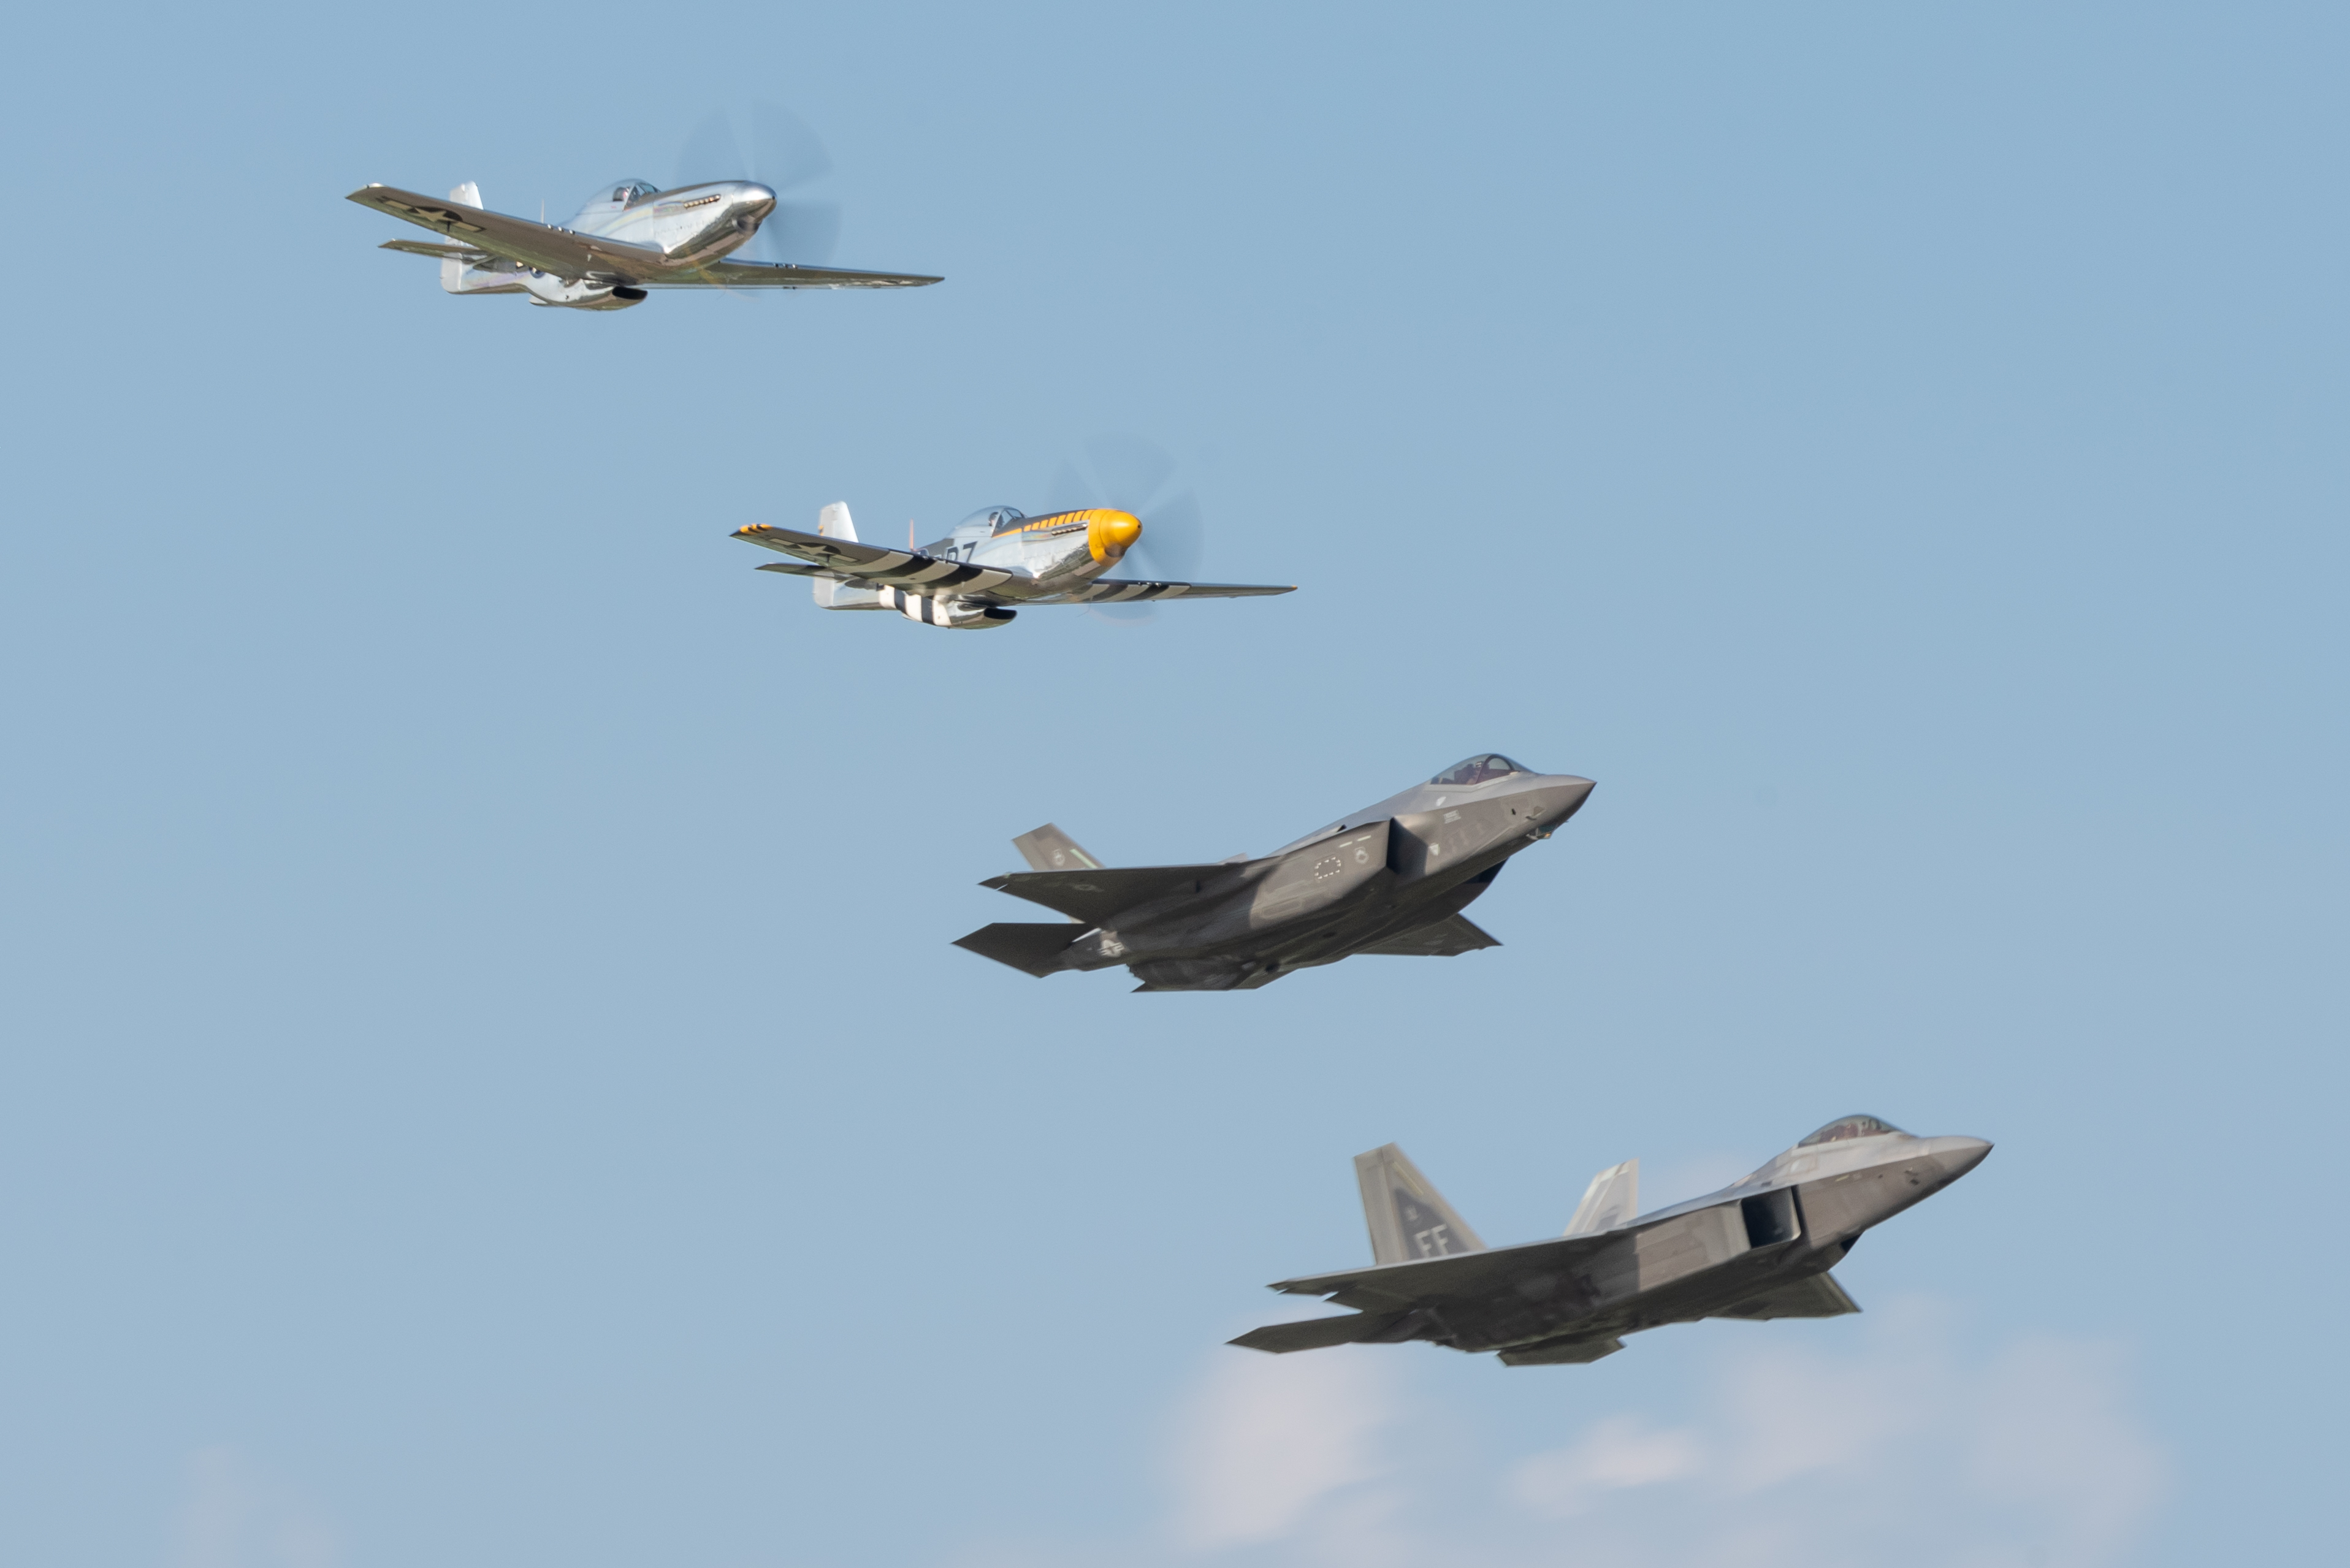 f22 demo team flying at airventure oshkosh with p51 mustang and f35